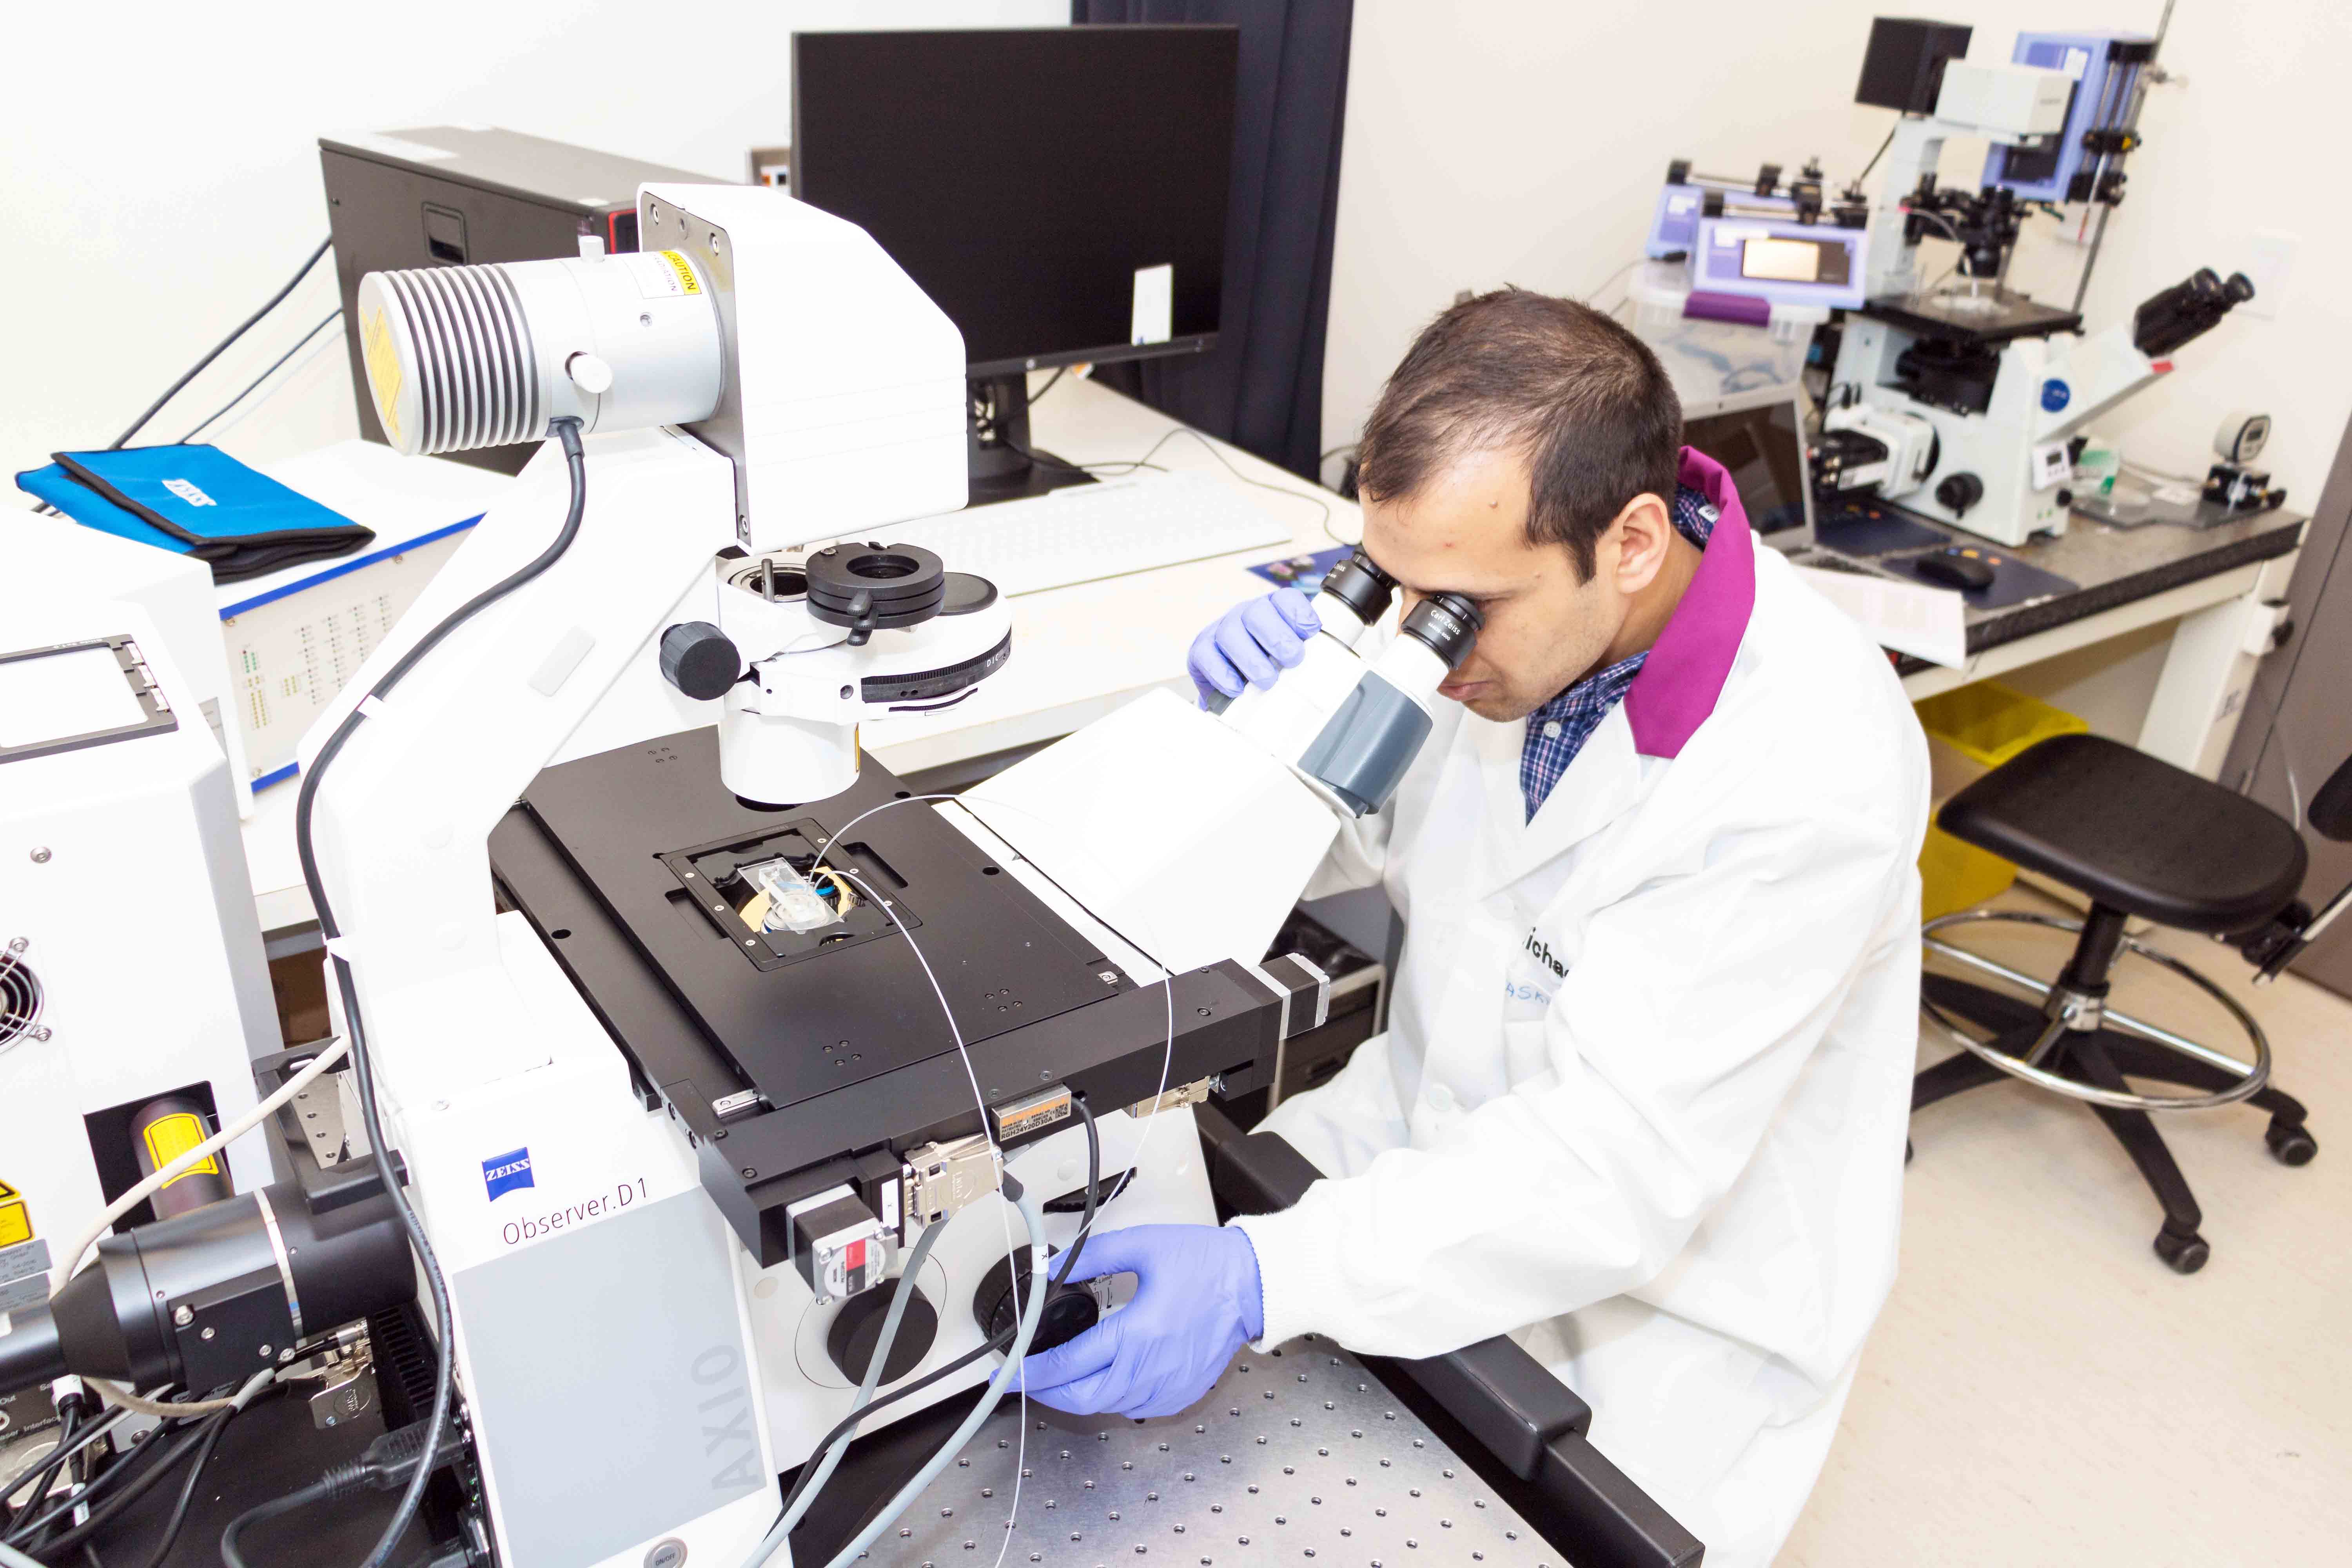 A student using an optical microscope in the laboratory.